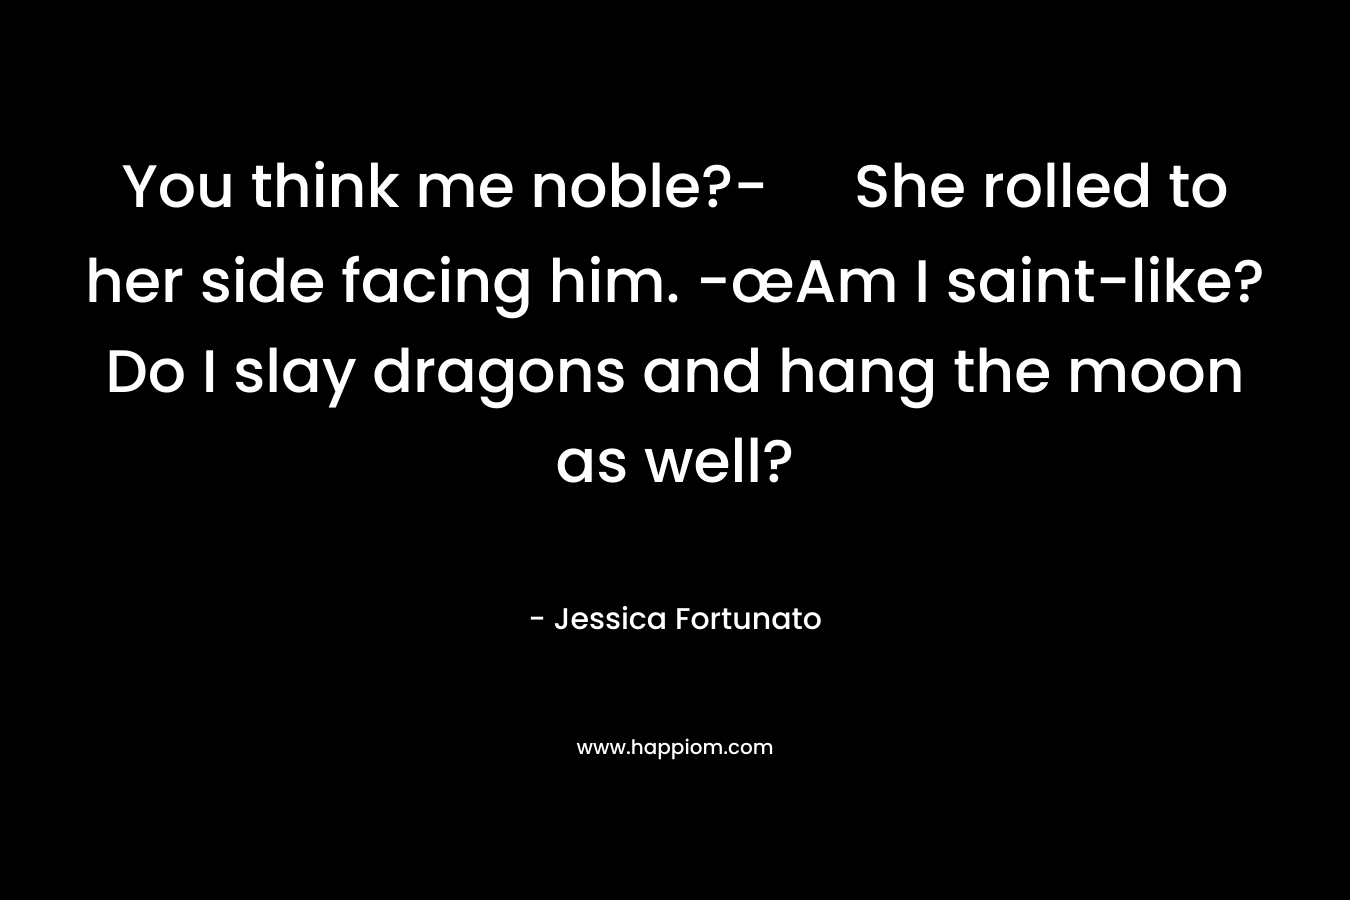 You think me noble?- She rolled to her side facing him. -œAm I saint-like? Do I slay dragons and hang the moon as well? – Jessica Fortunato